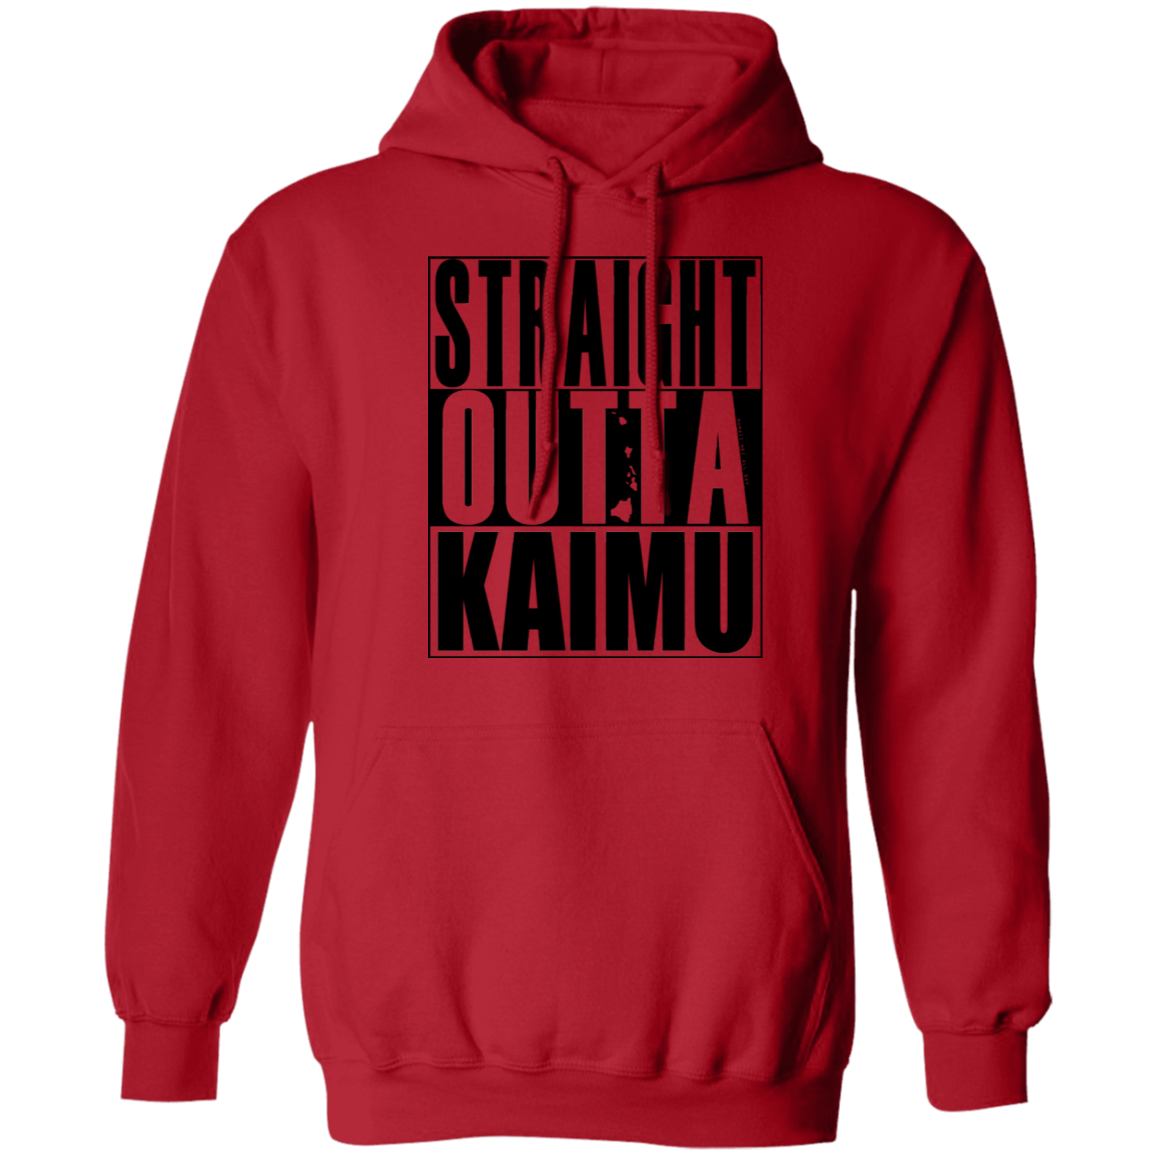 Straight Outta Kaimu(black ink) Pullover Hoodie